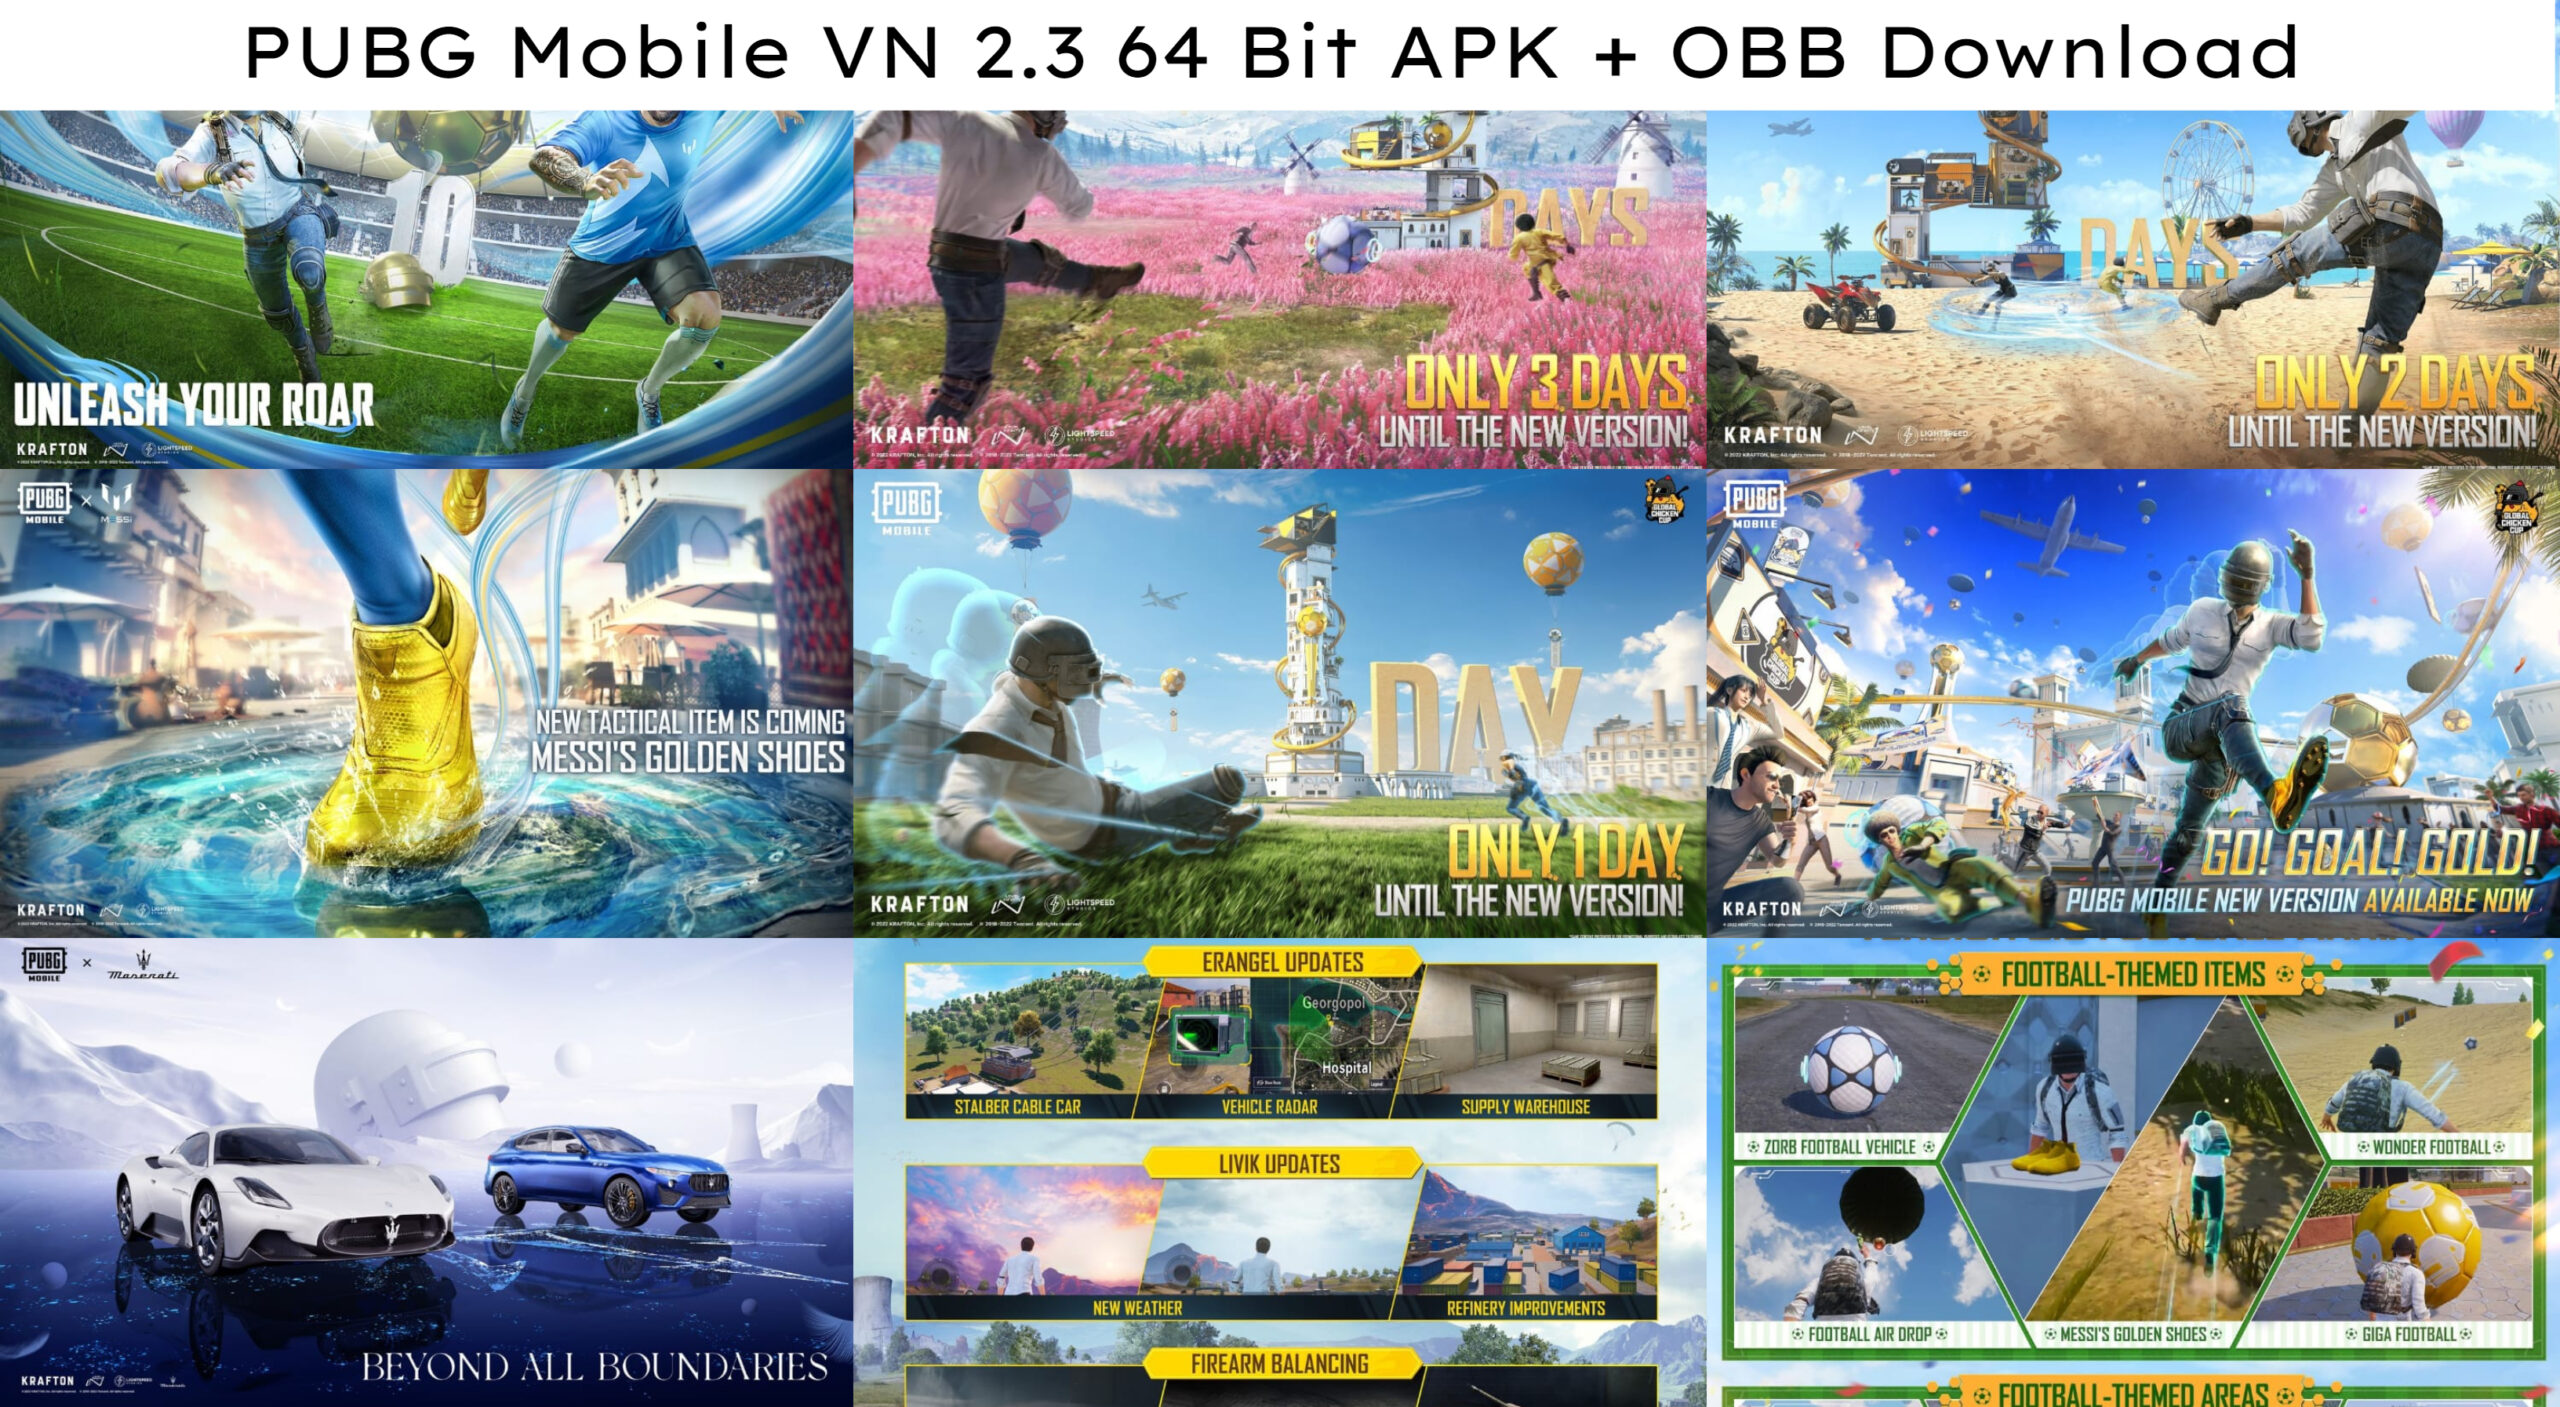 You are currently viewing PUBG Mobile VN 2.3 64 Bit APK + OBB Download